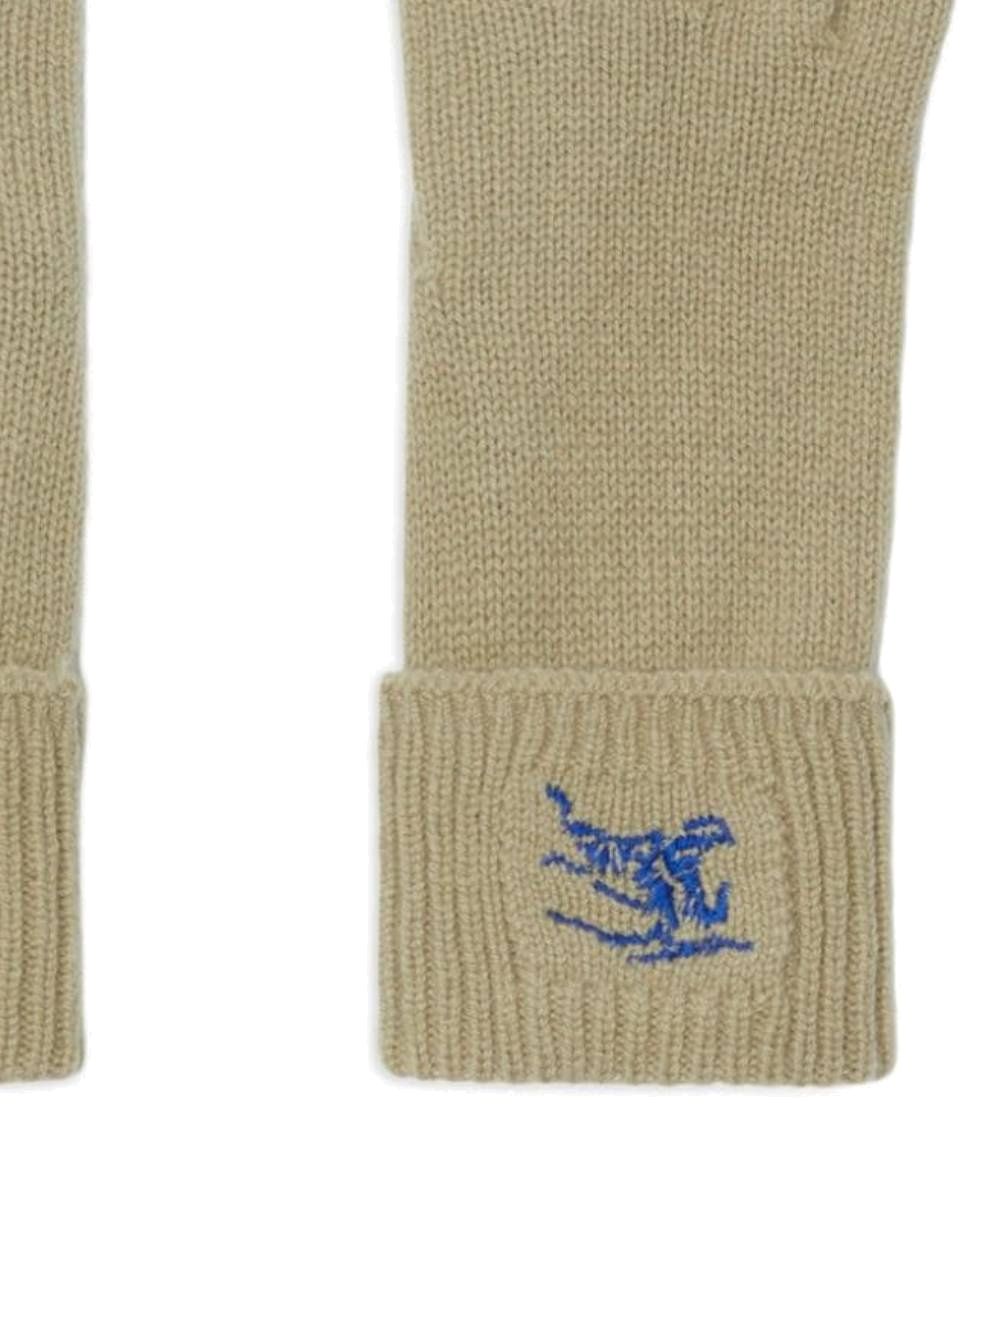 Embroidered knitted gloves